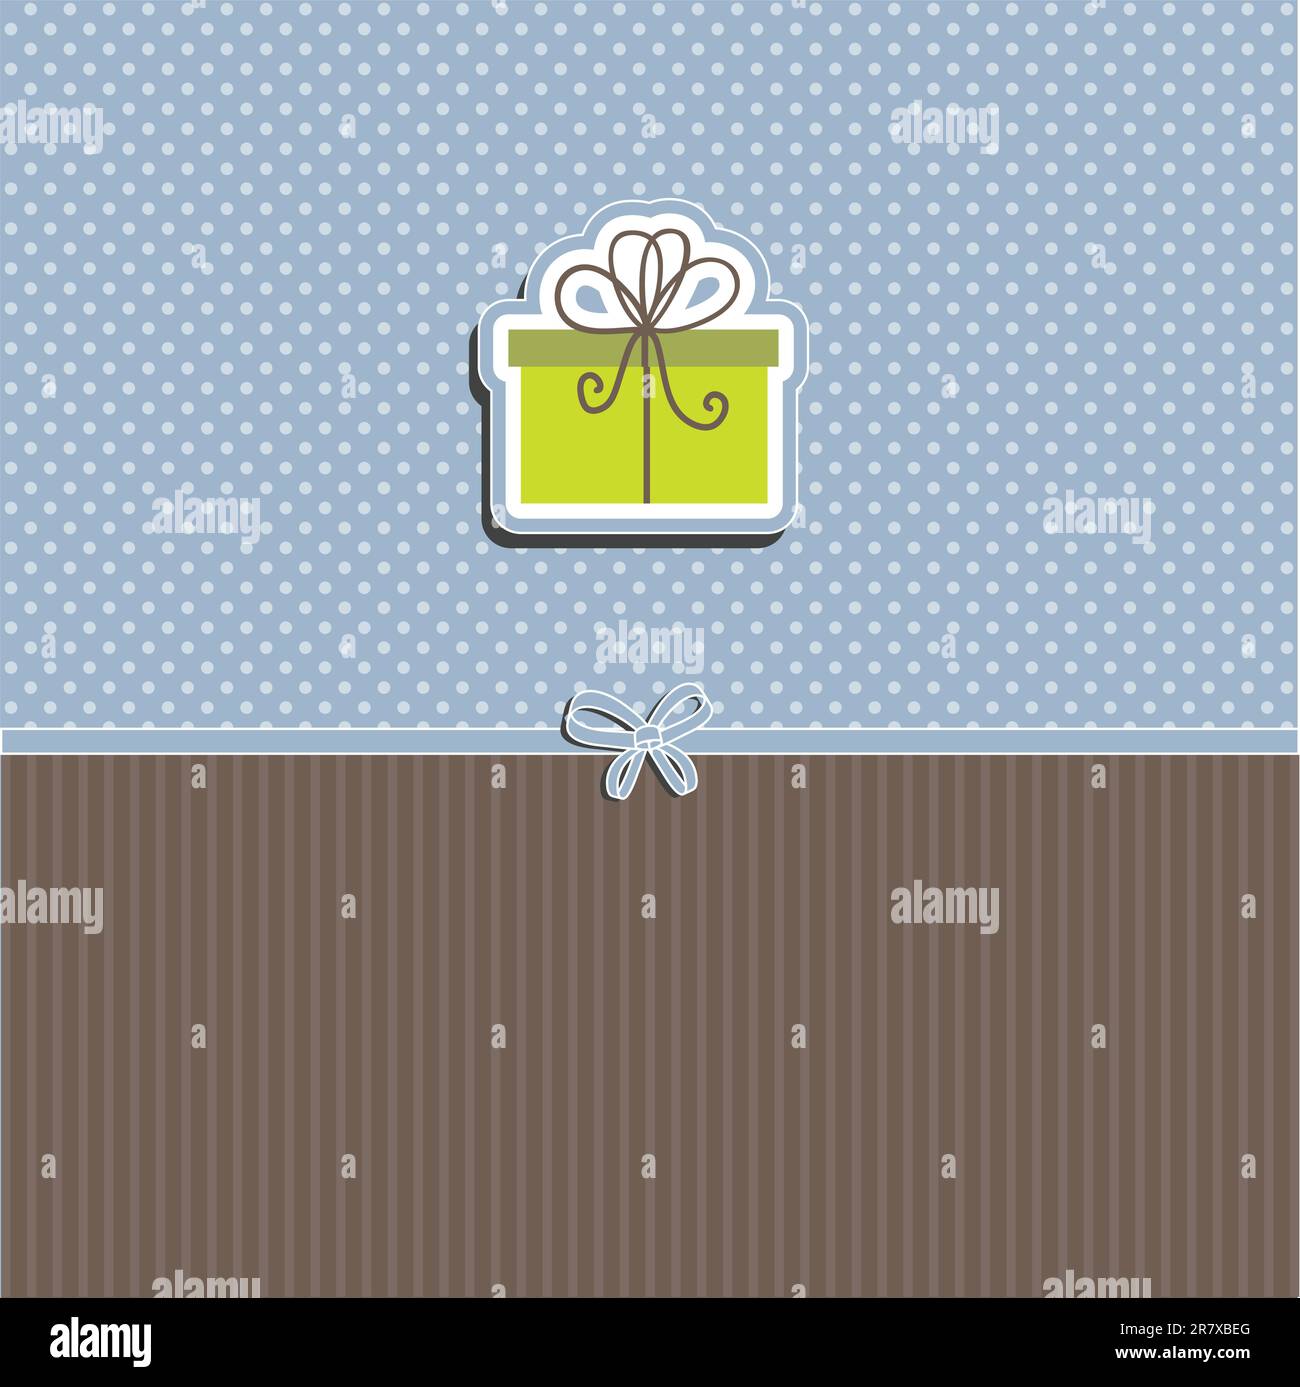 Cute Christmas background with image of gift Stock Vector